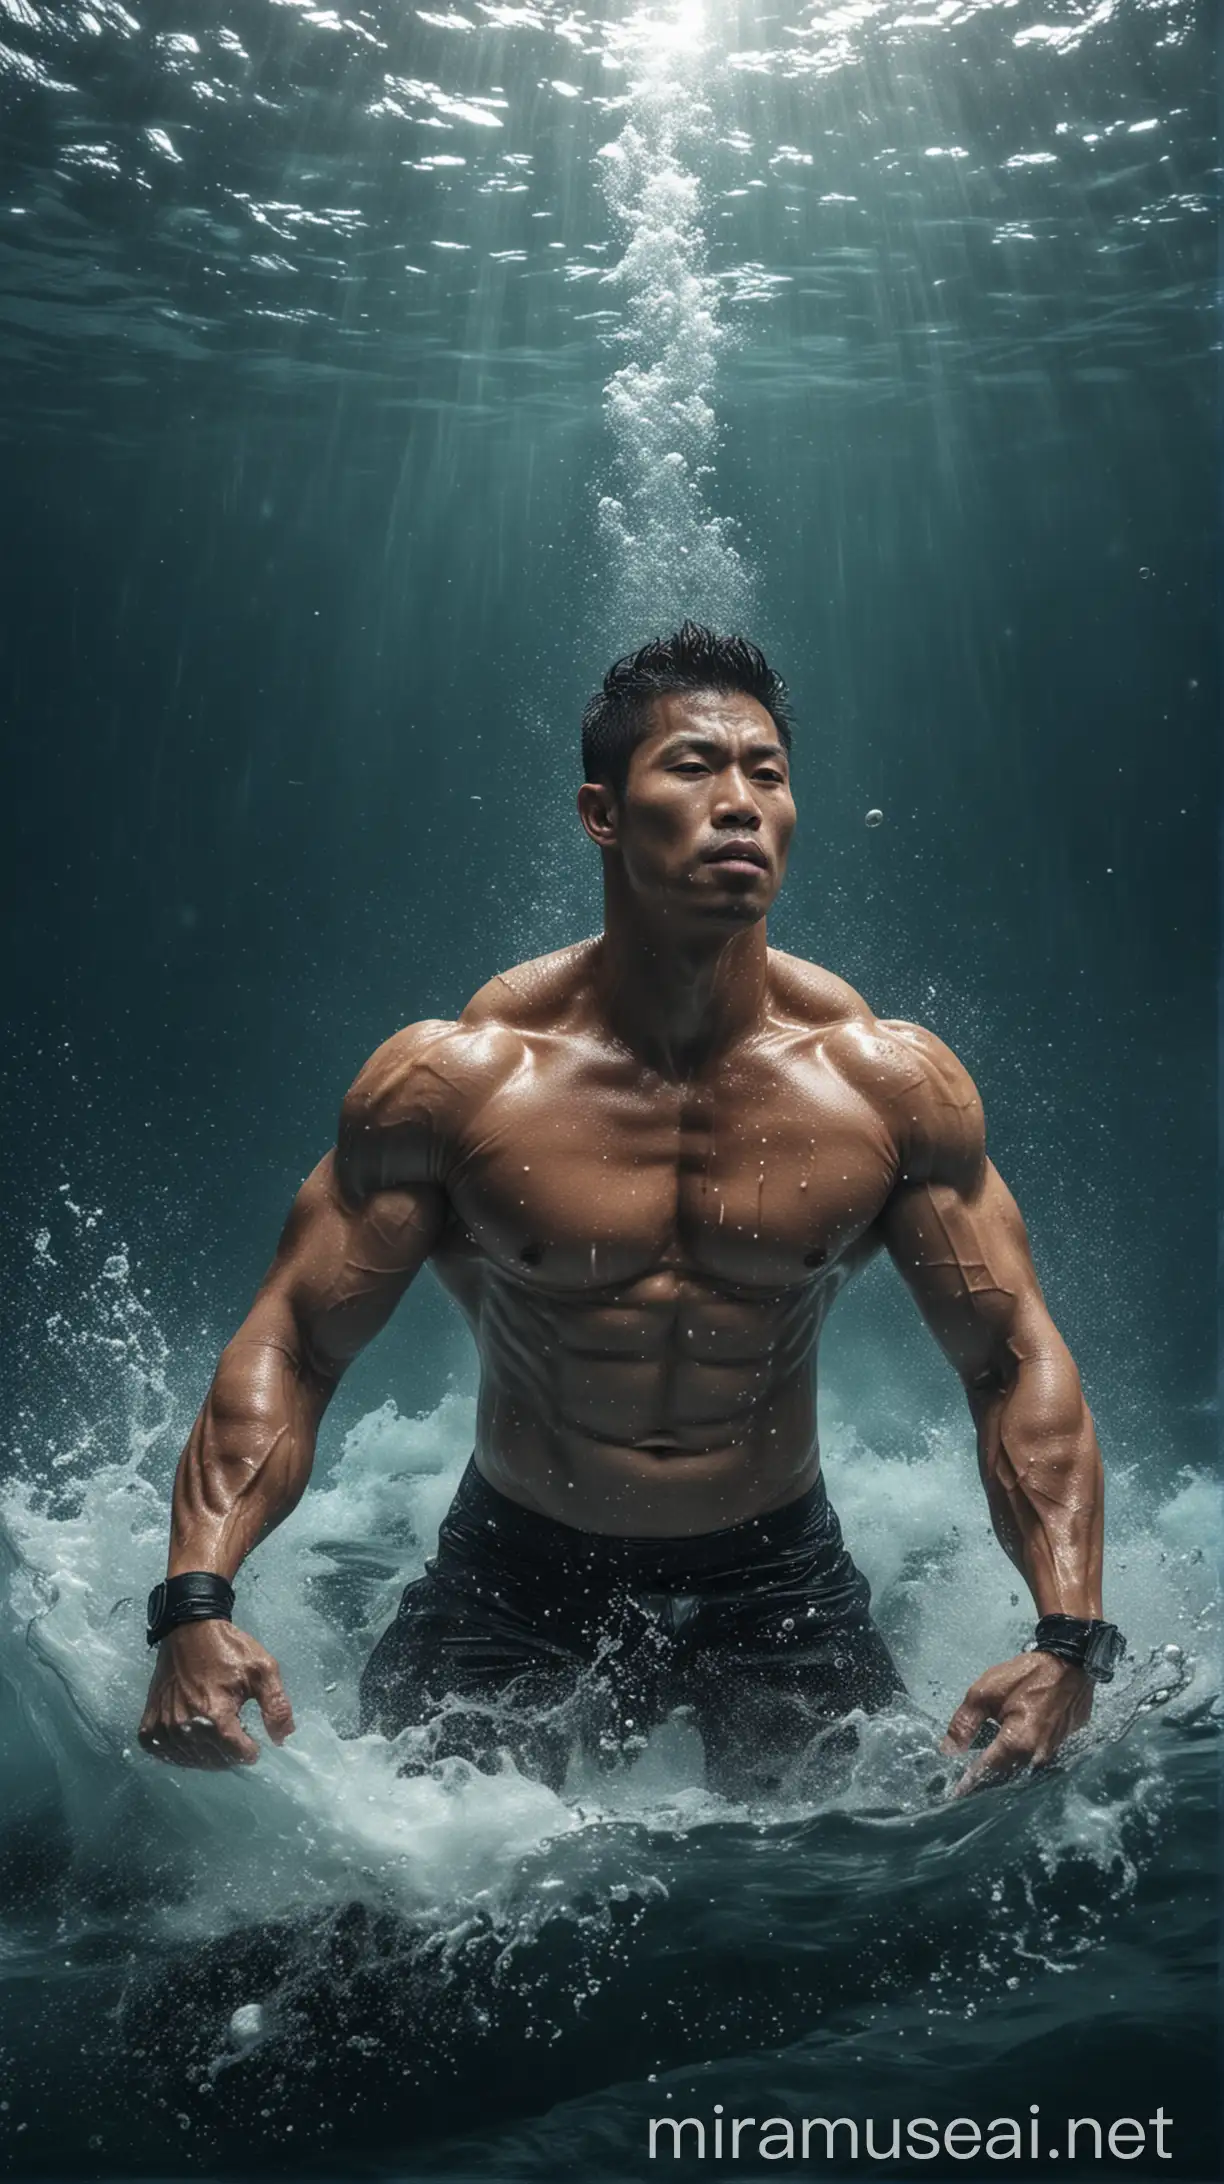 Asian Bodybuilder Drowning in Ocean with Submarine